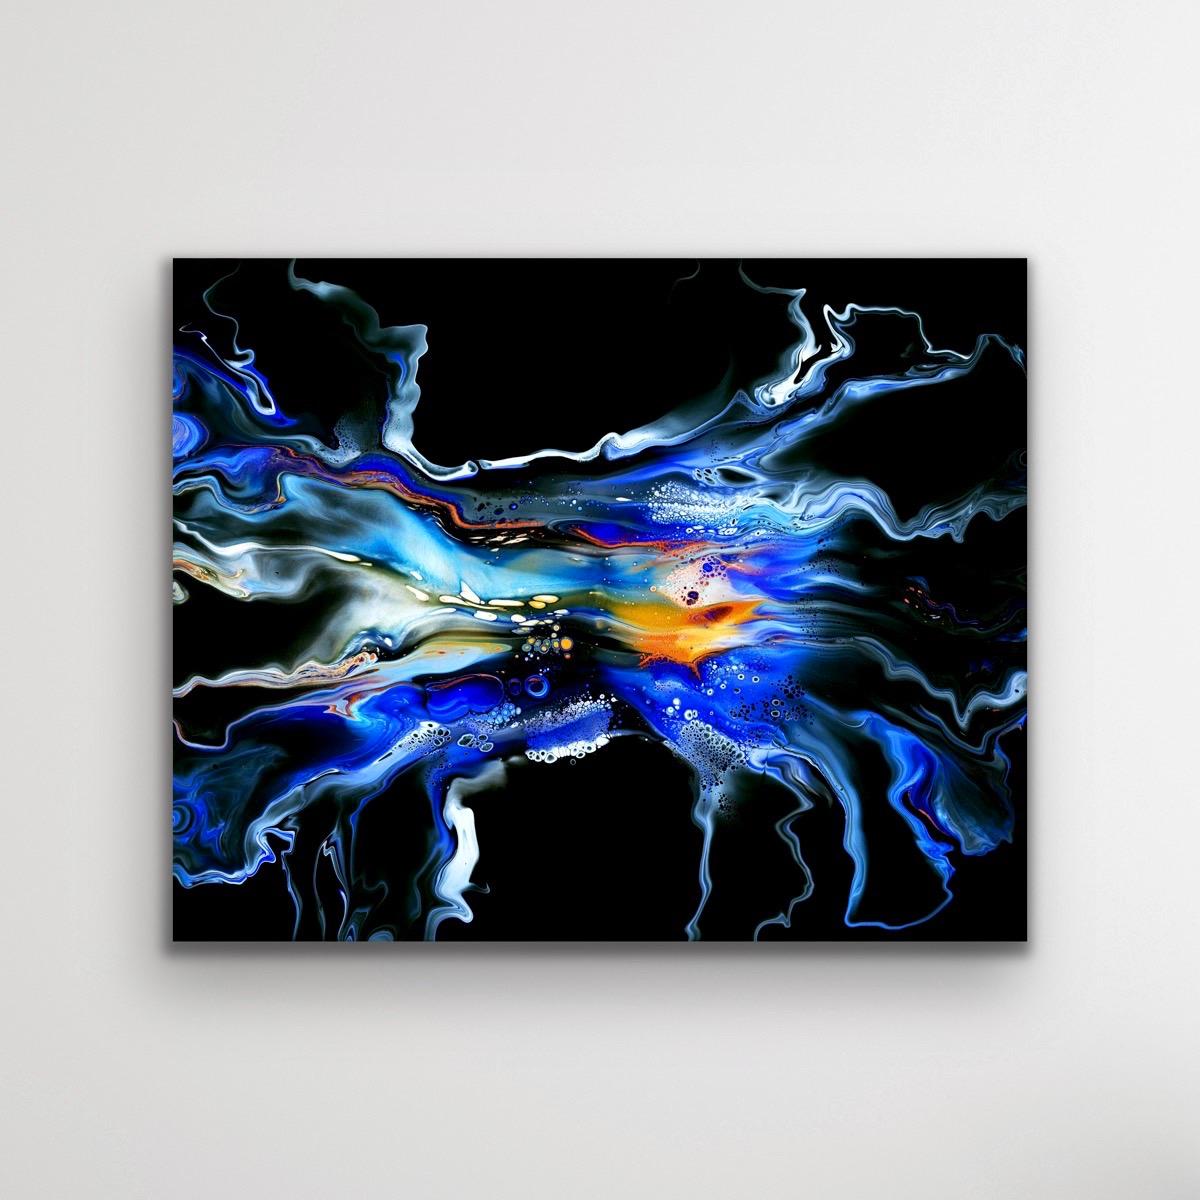 Black Abstract Contemporary Painting, Fluid Art, Modern LE Giclee Print on Metal